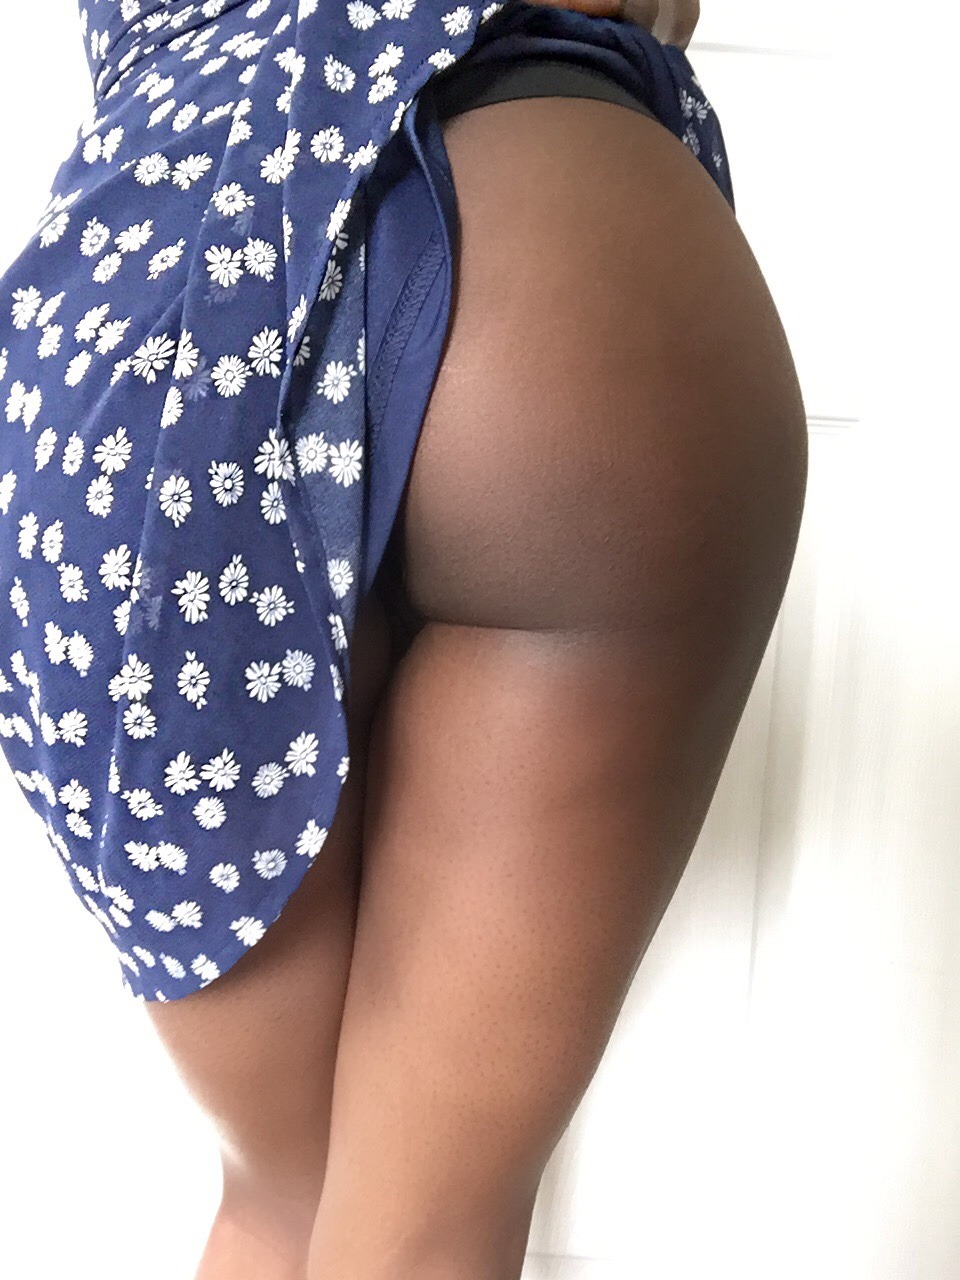 shy-foxxx:  My butt was so cute in this dress 🍑🍑🍑 